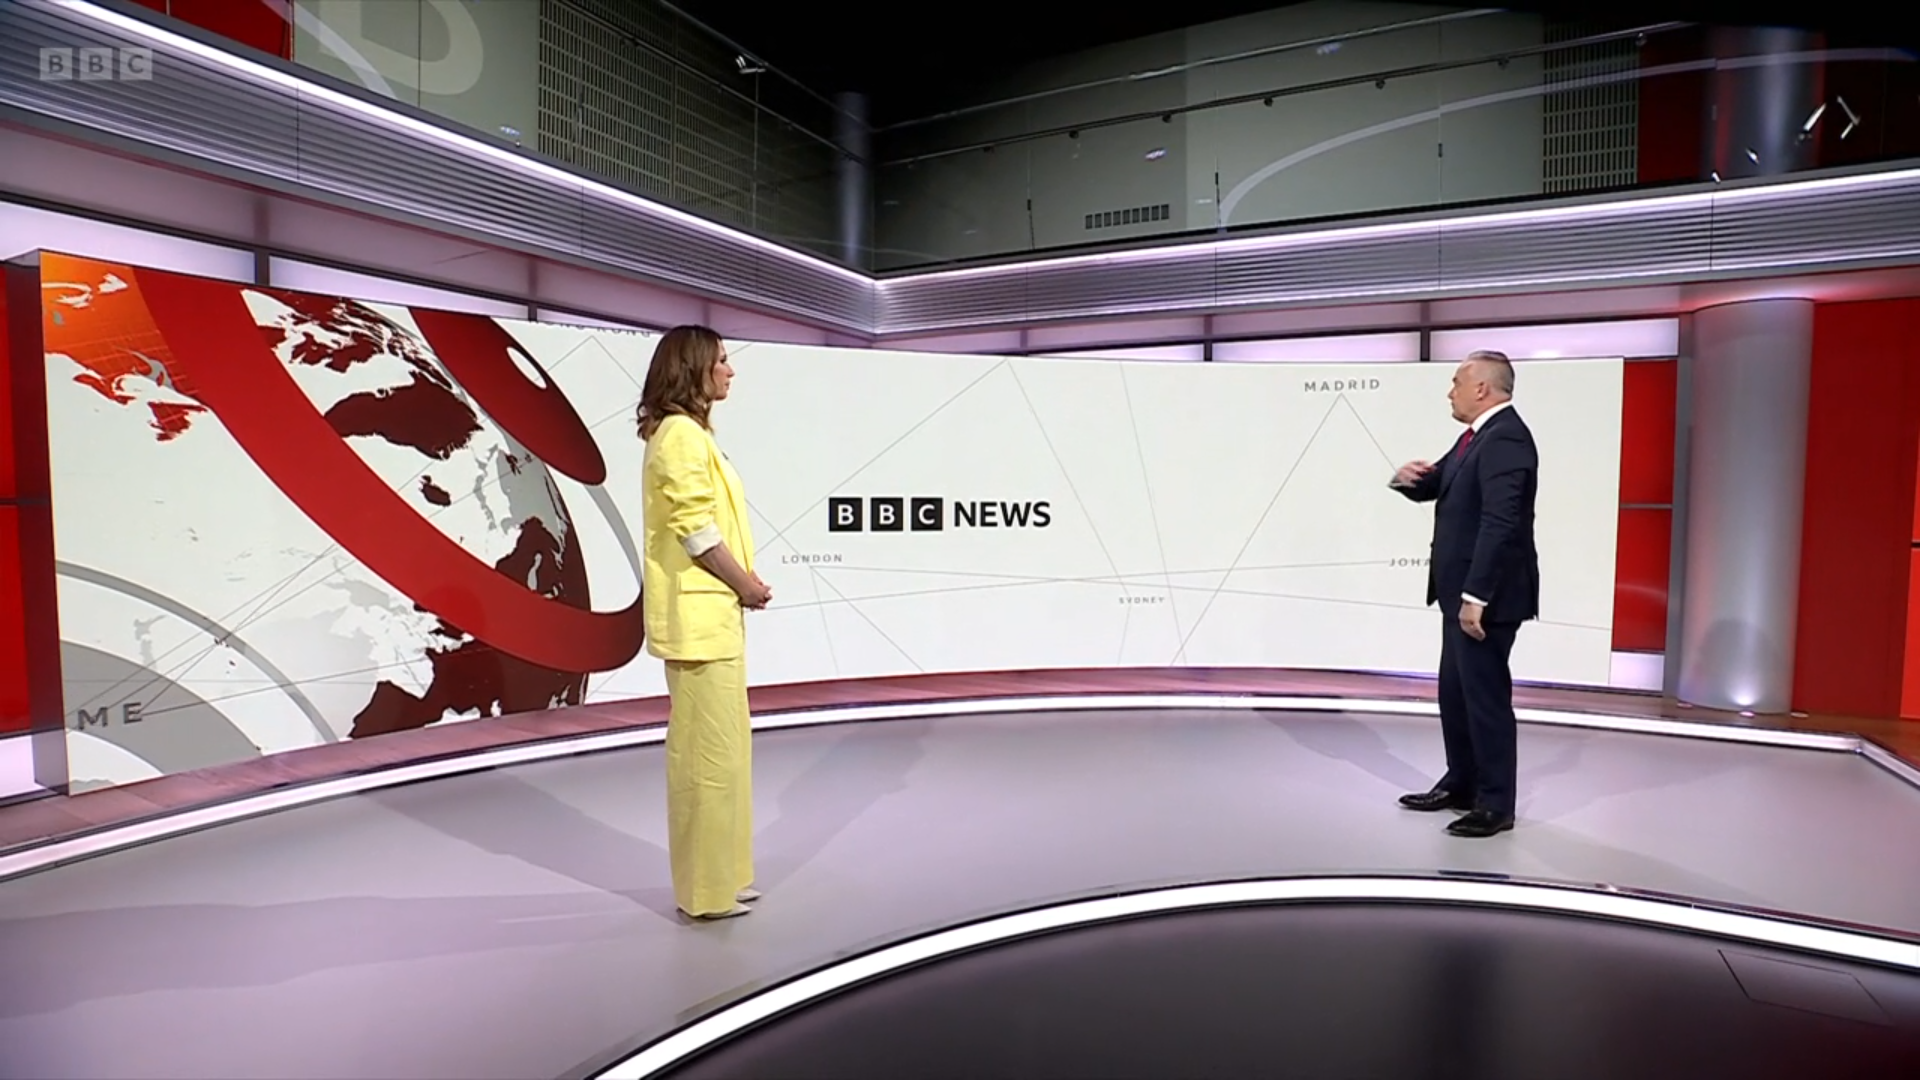 The catwalk area of the new BBC News set, with a large, continuous curved screen. Alex Jones is stood at the interview point, as directed by Huw Edwards.